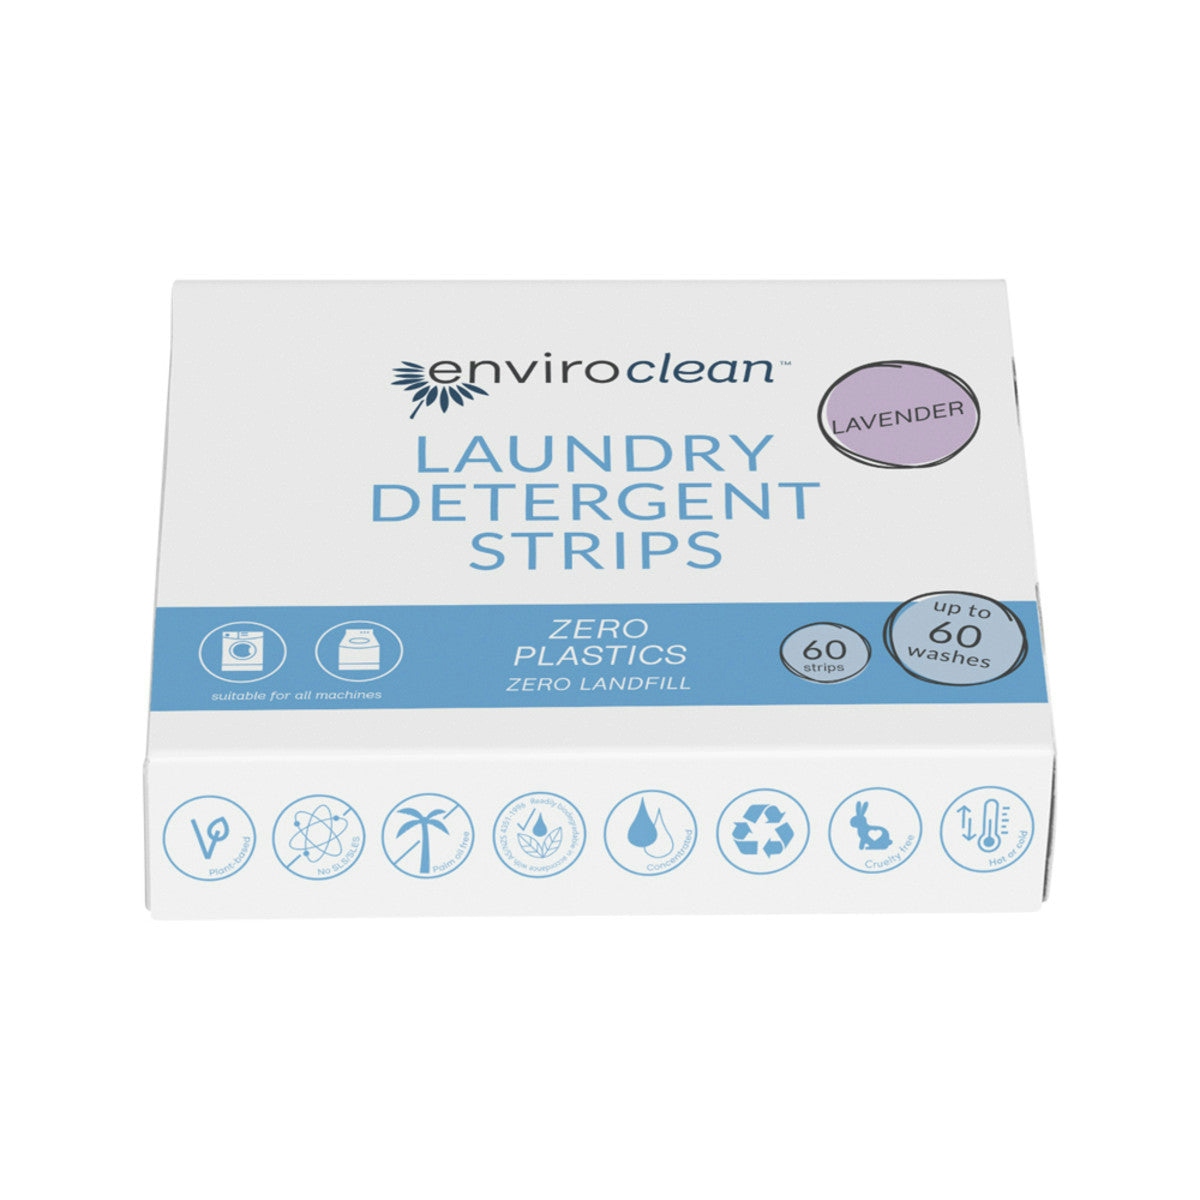 image of EnviroClean Laundry Detergent Strips Lavender x 60 Pack on white background